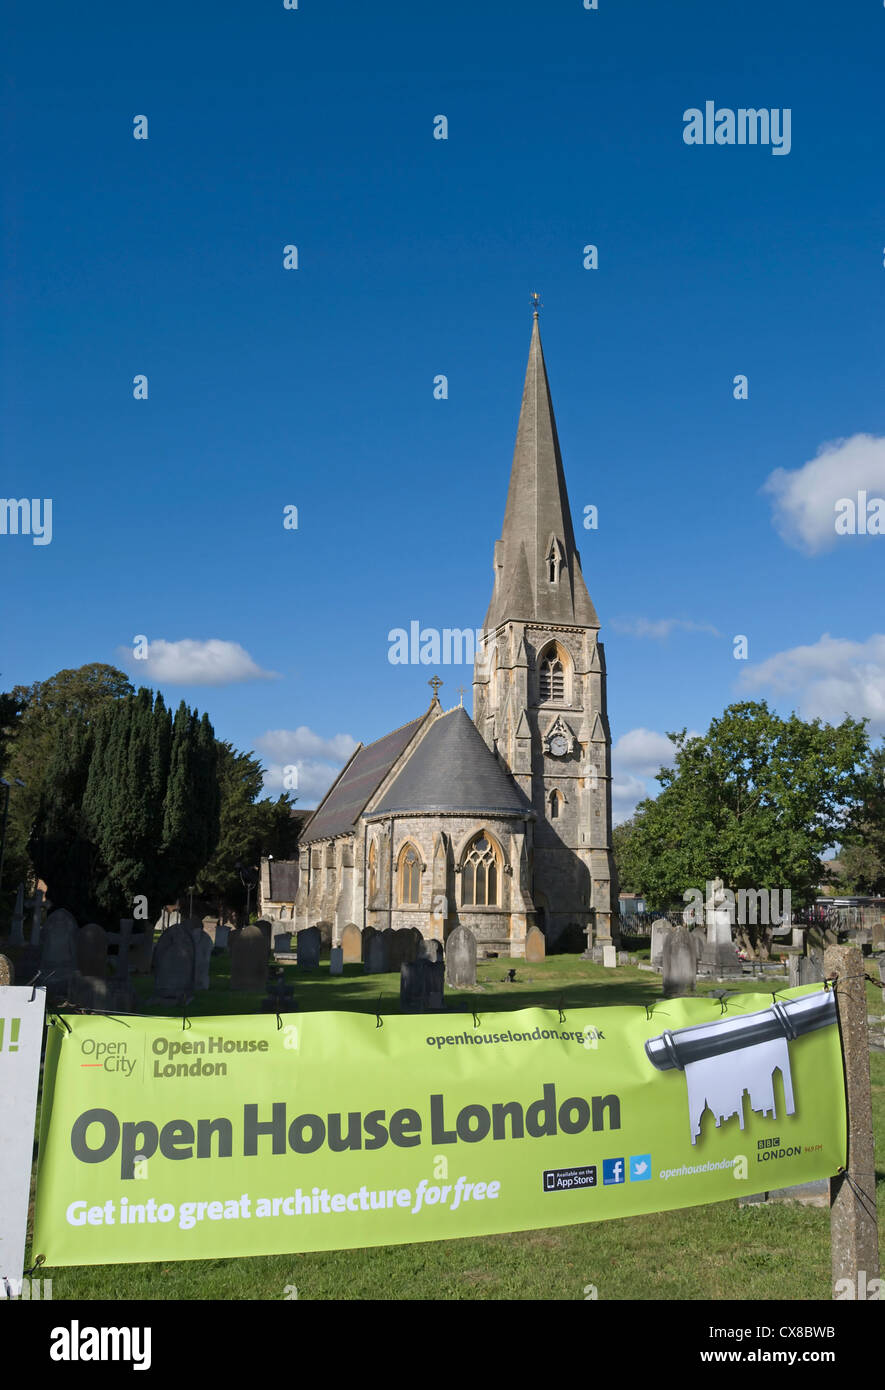 St George's Church, hanworth, Middlesex, Angleterre, avec open house london banner Banque D'Images